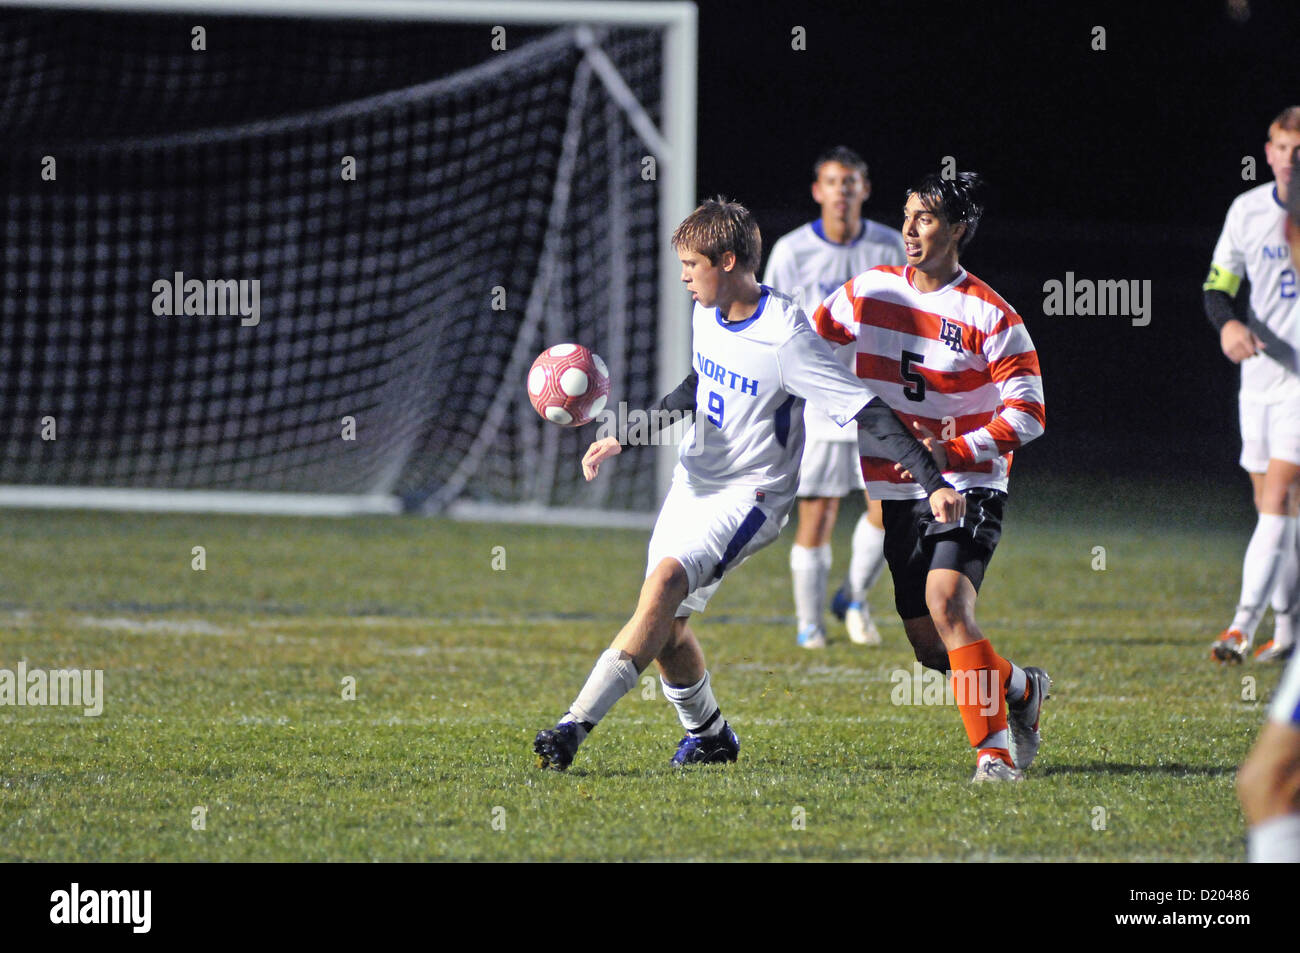 Soccer player turns as he attempts to control the ball off his chest during a high school soccer match. USA. Stock Photo